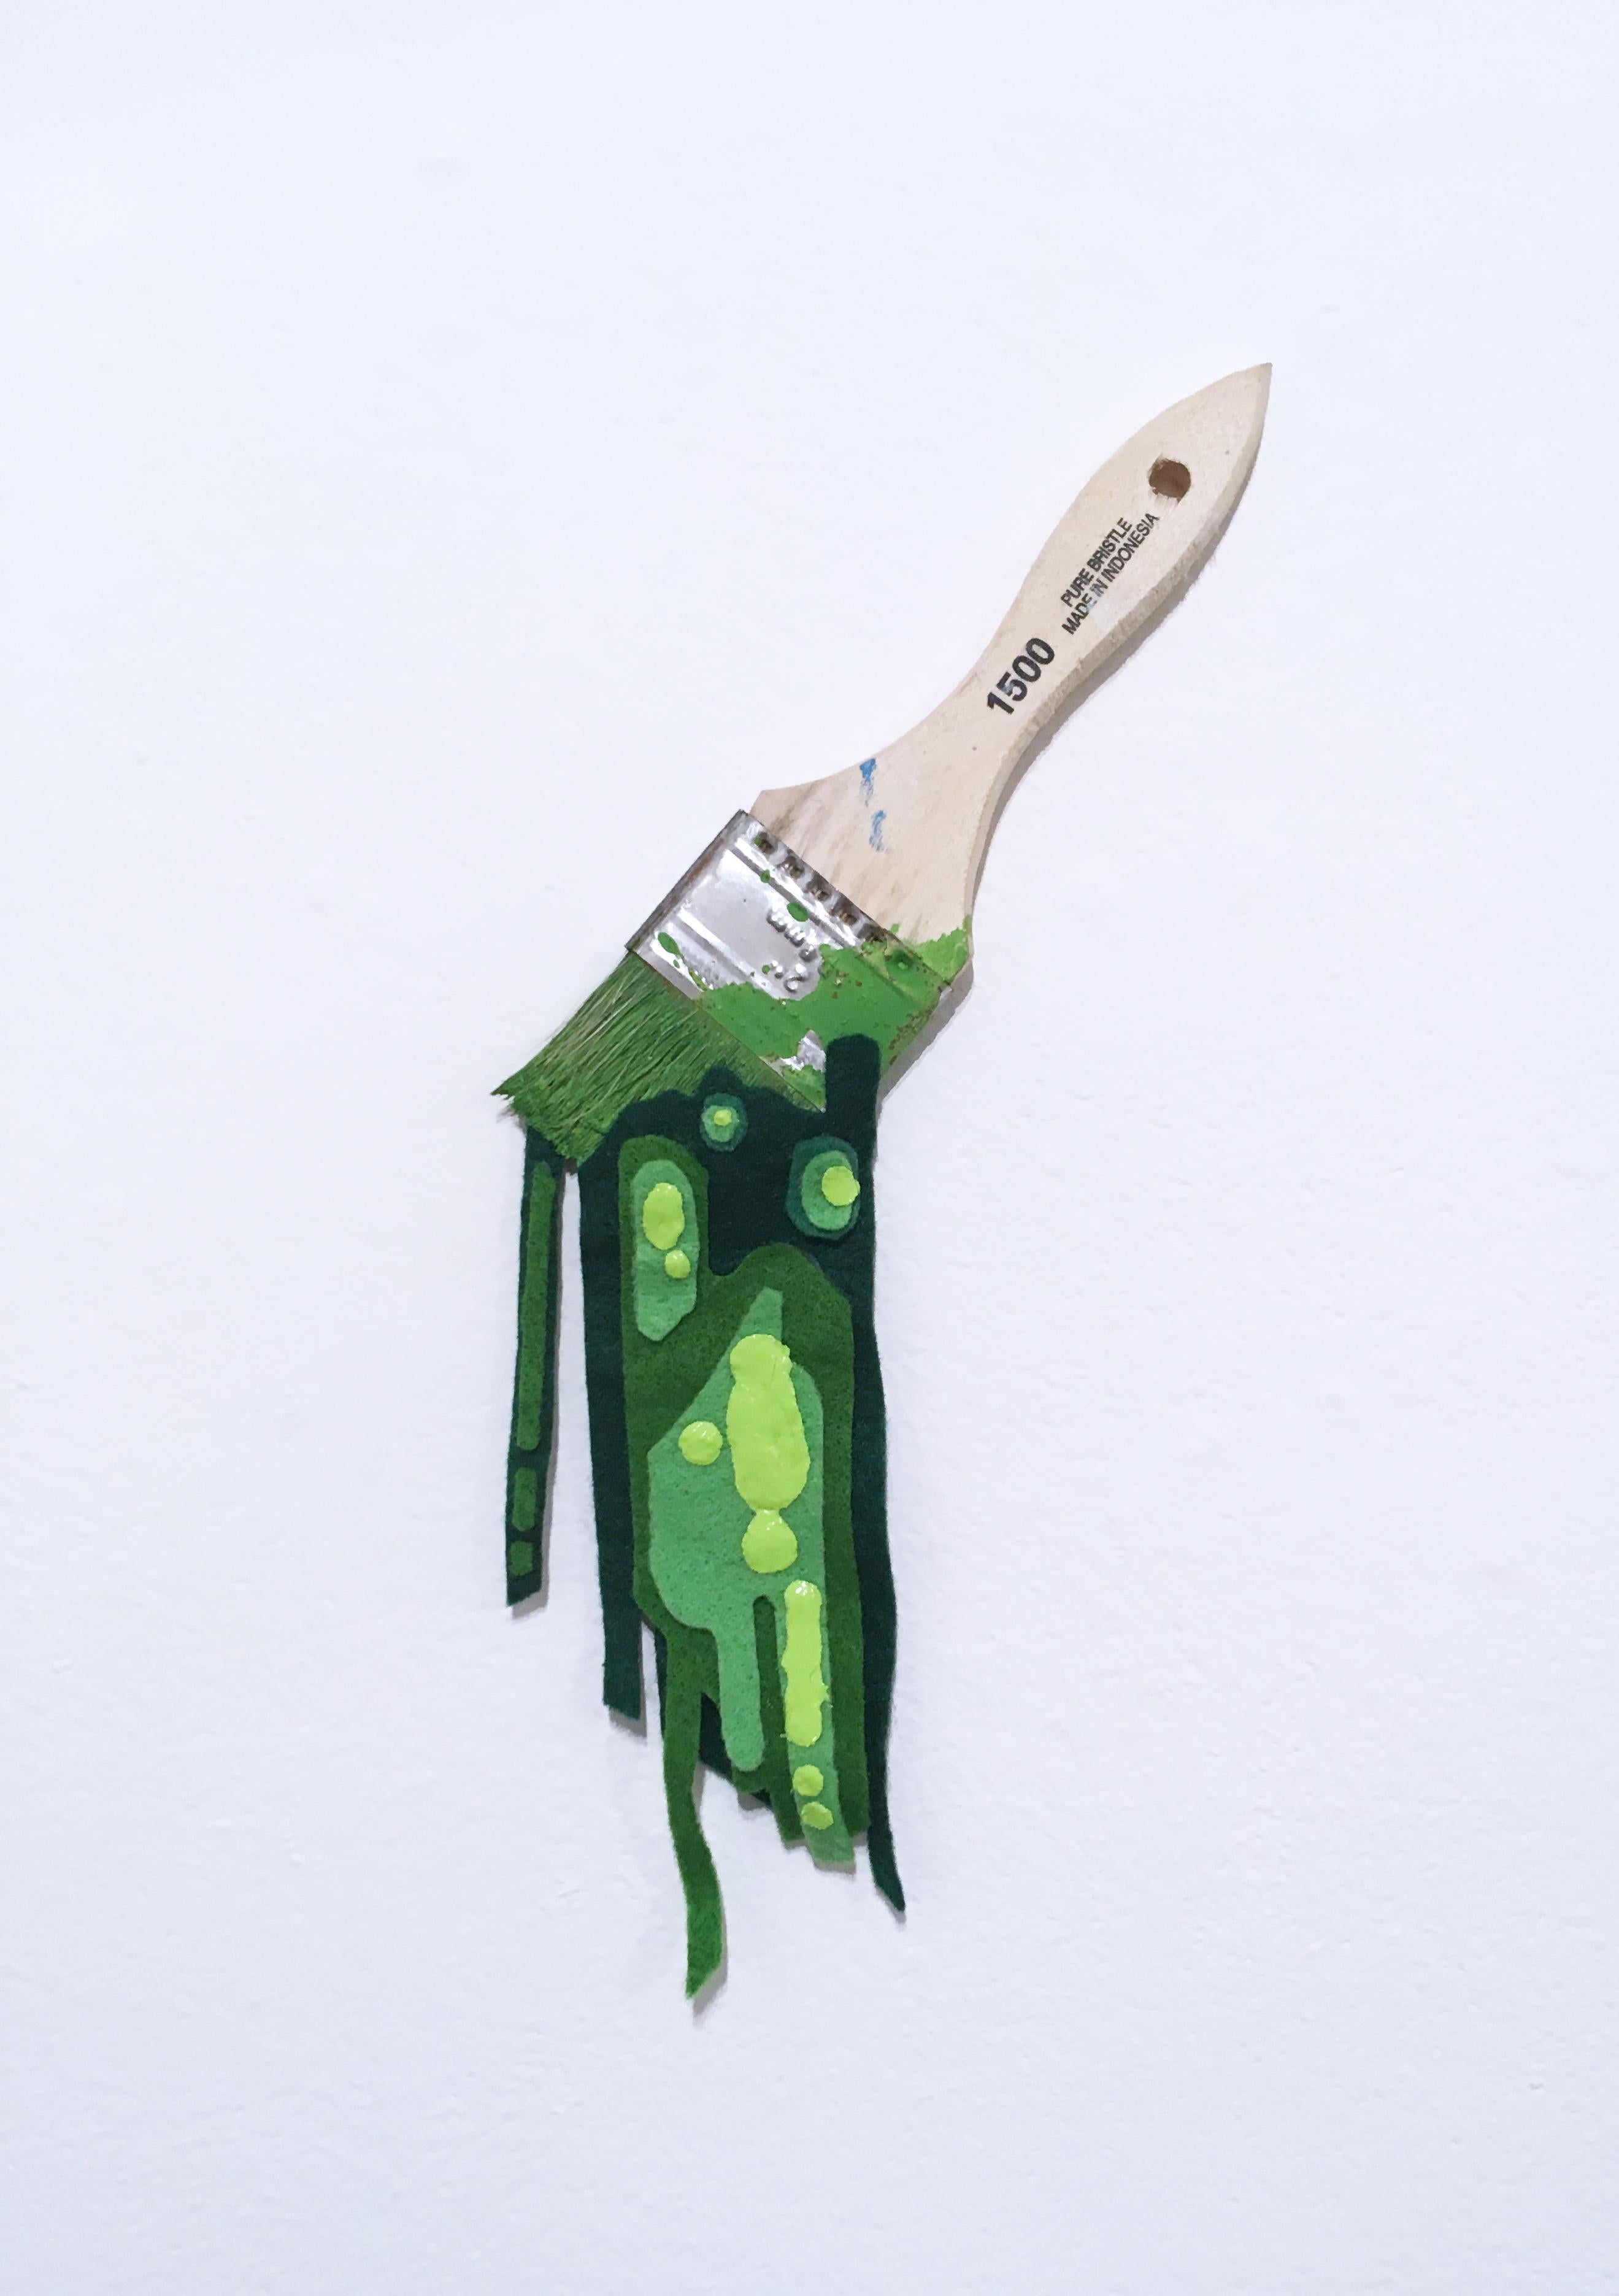 Tool of the Trade Brush #2, 2018, paint brush, drips, graffiti, green, wood - Mixed Media Art by Unknown